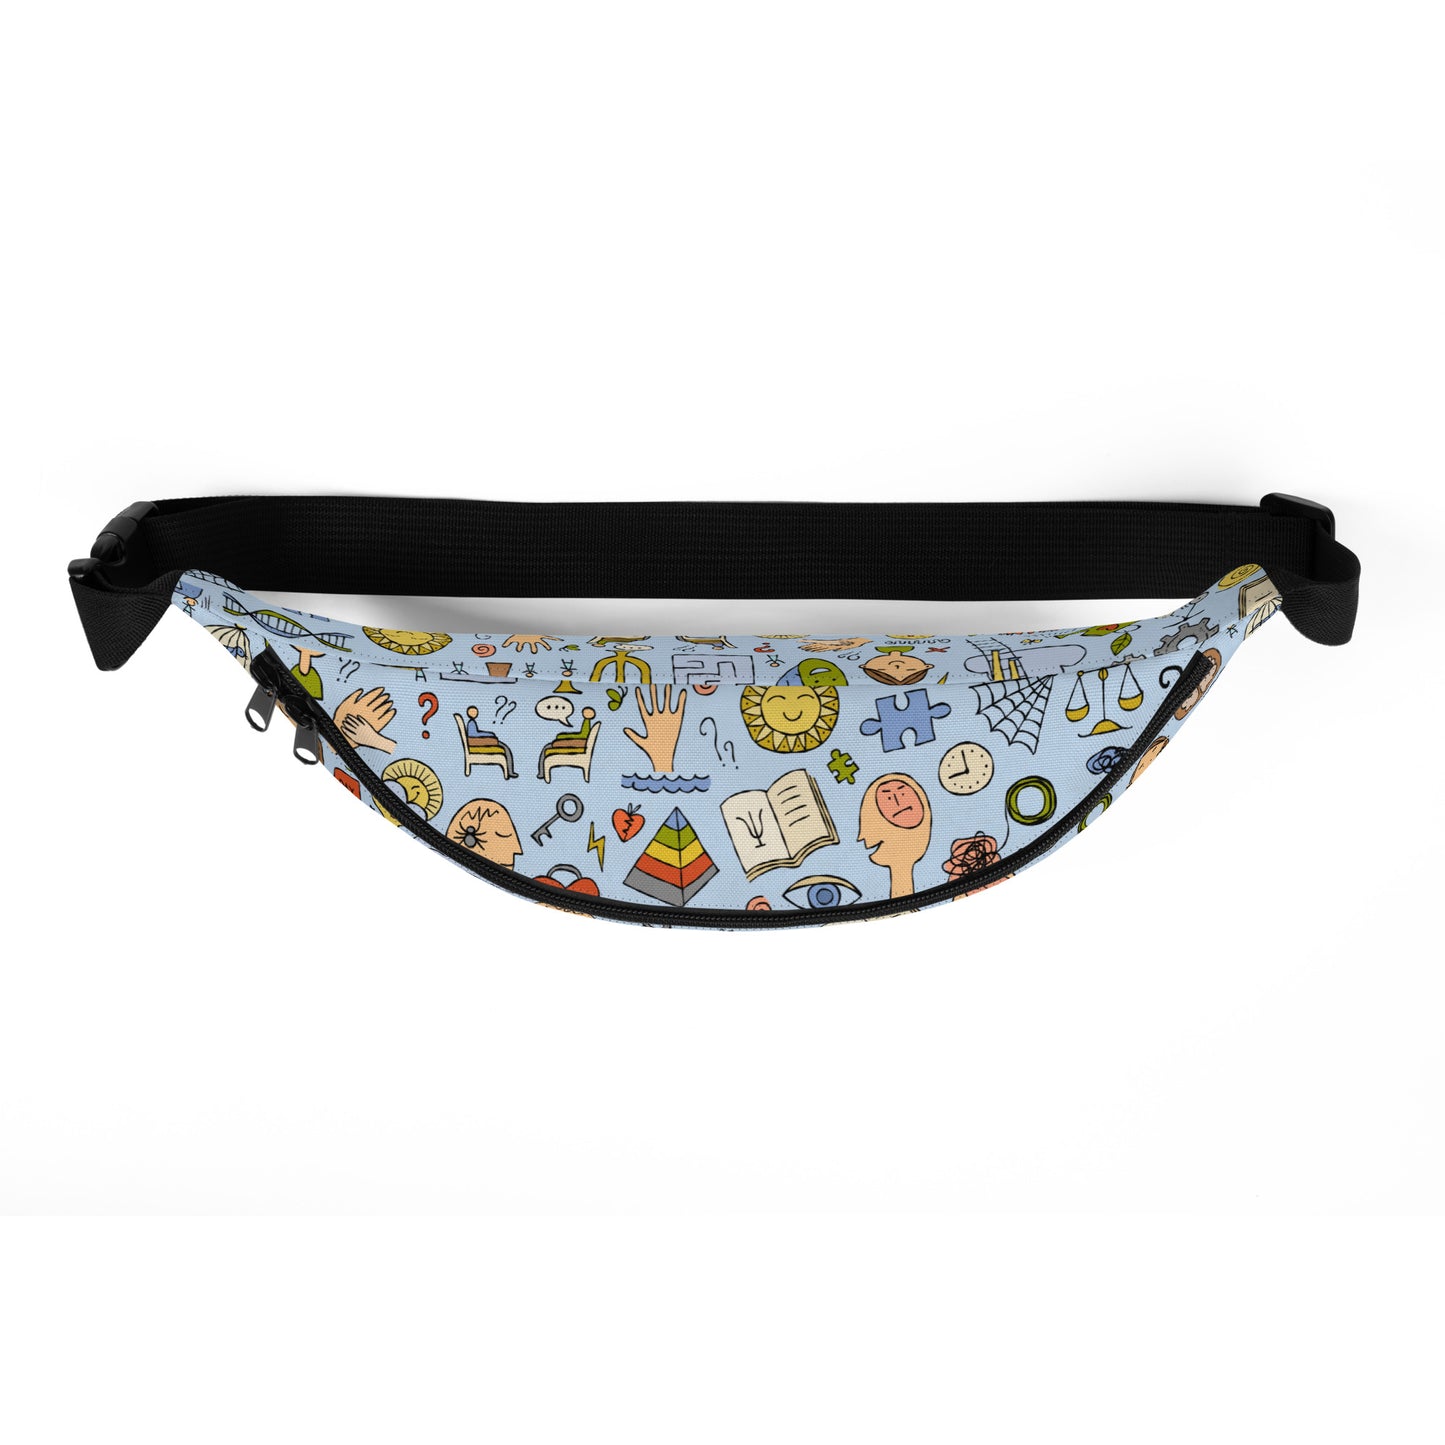 Waist Bag with funny psychology print. Top view